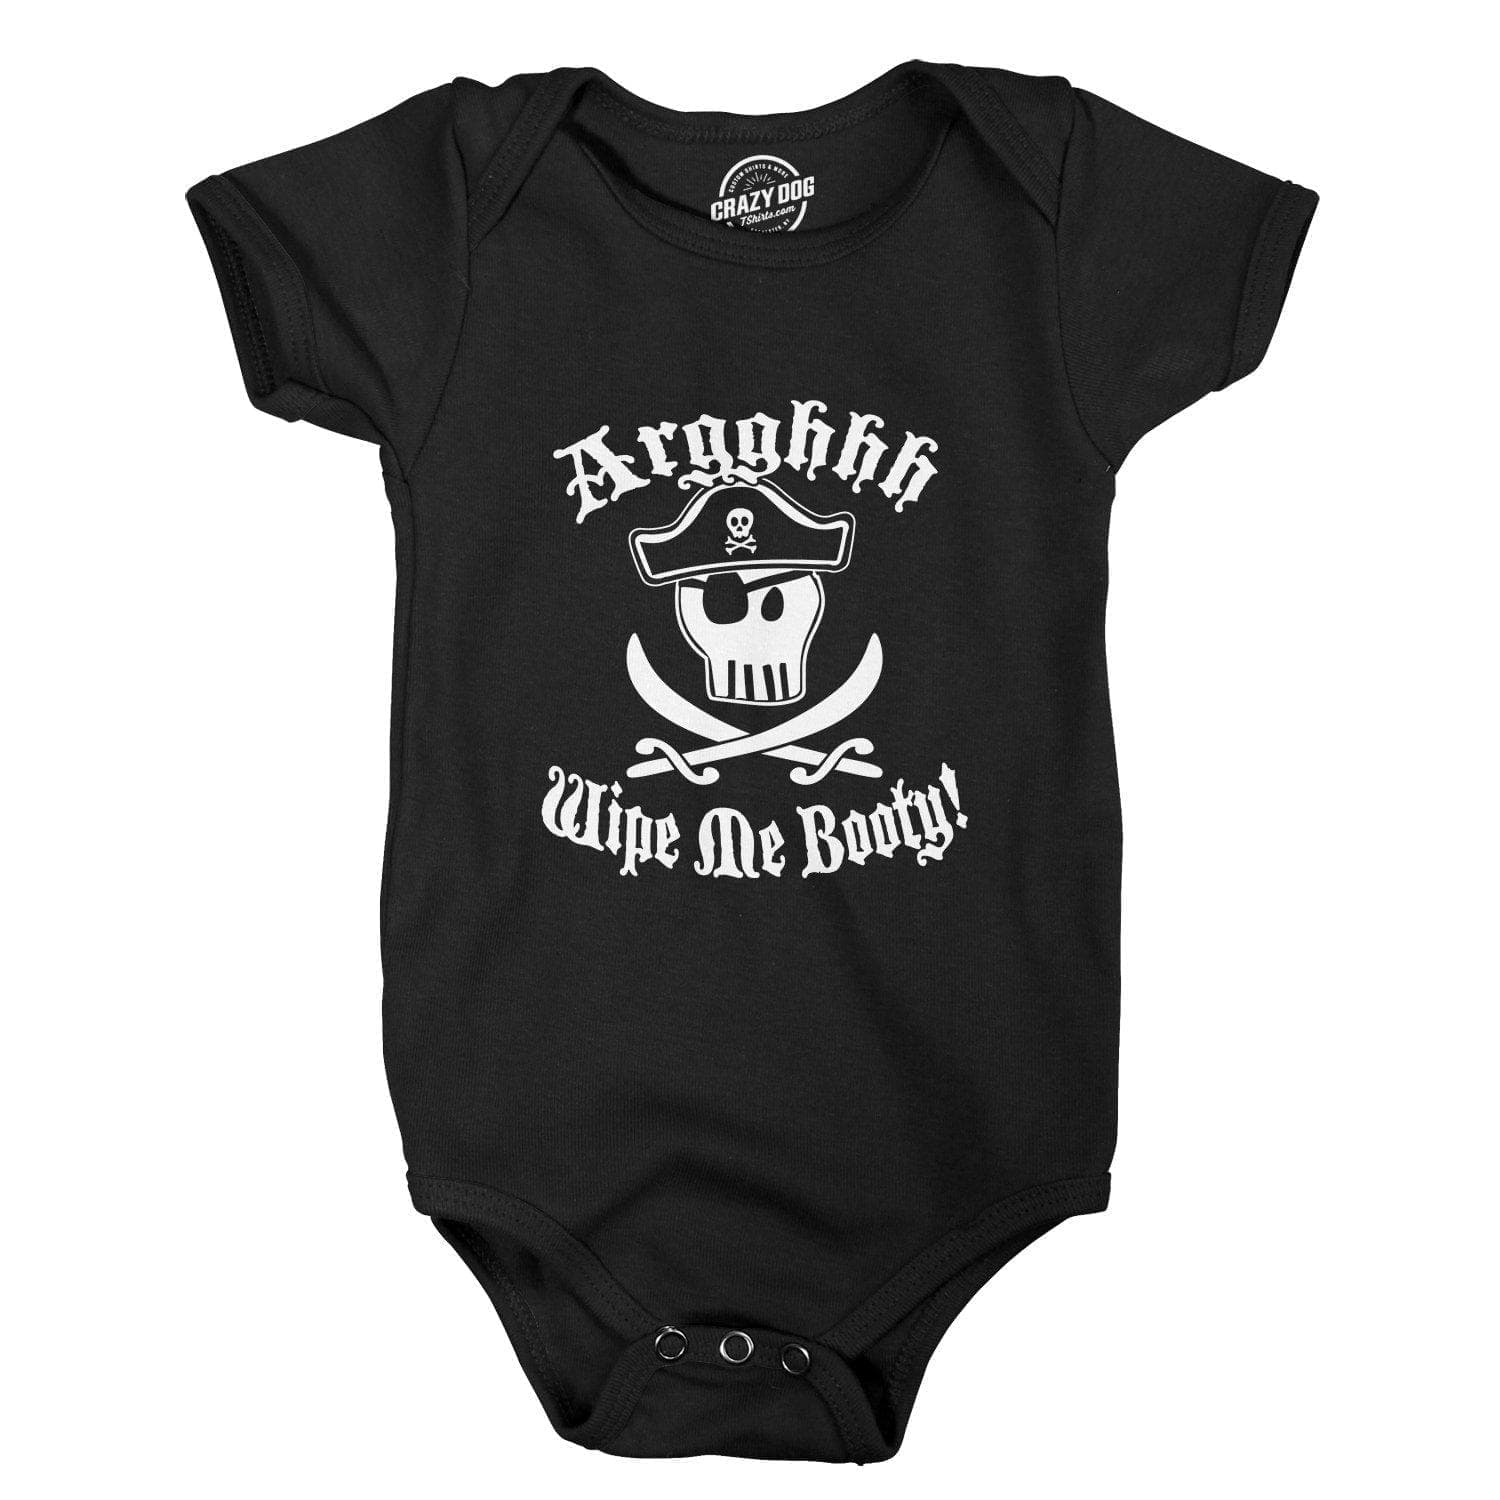 Wipe Me Booty Aaaargh Baby Bodysuit - Crazy Dog T-Shirts